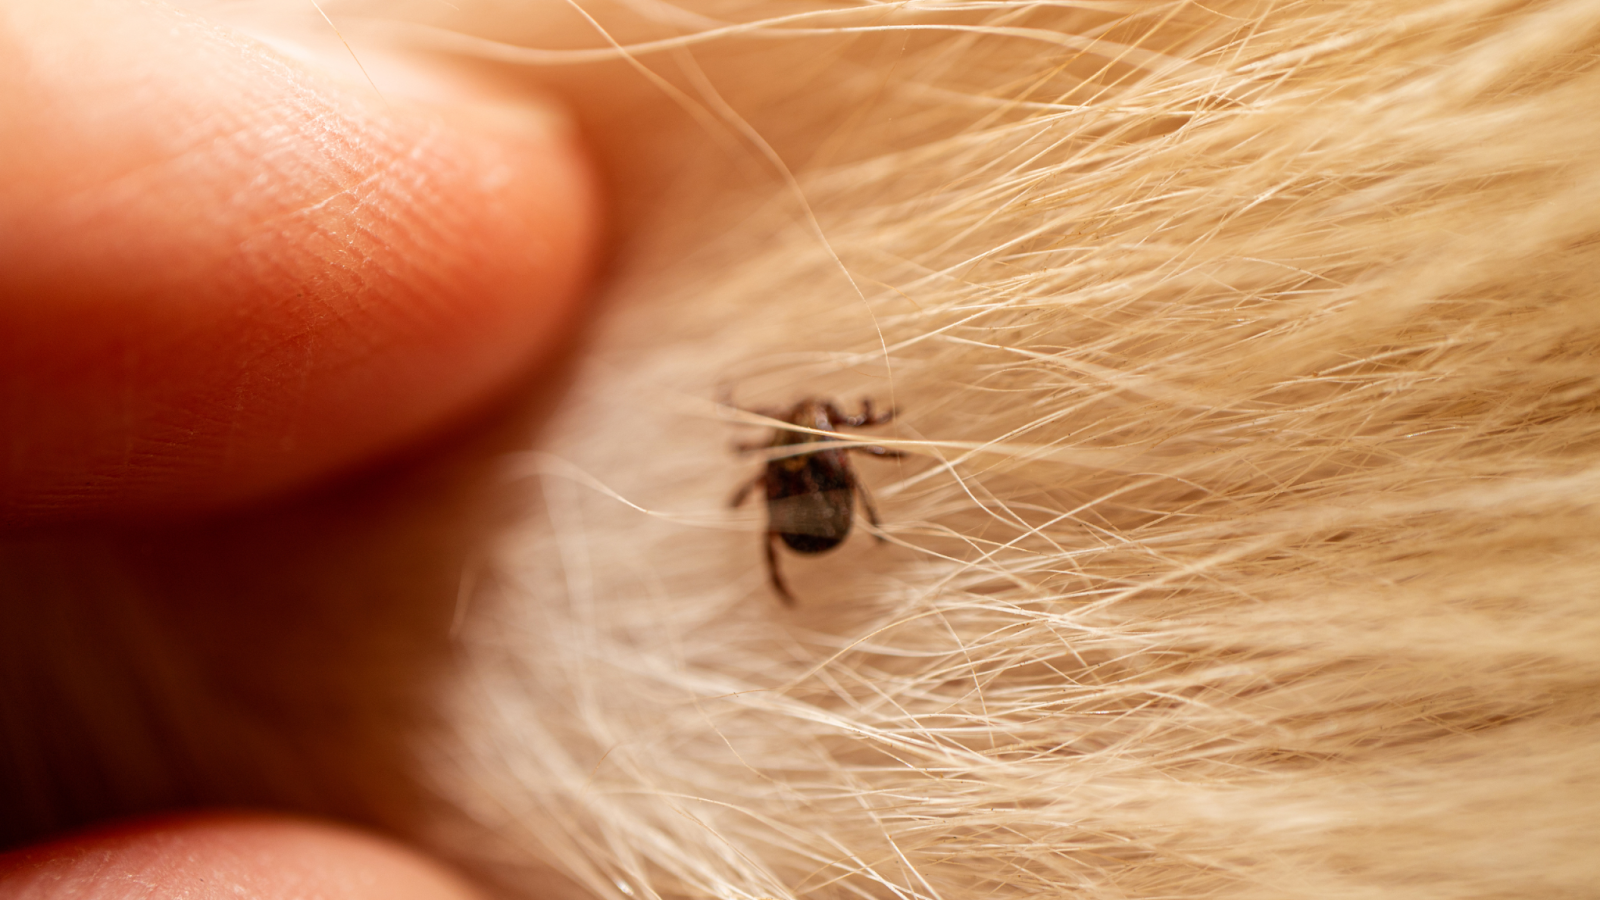 In addition to Lyme disease, there are several other infections that can be caused by ticks.